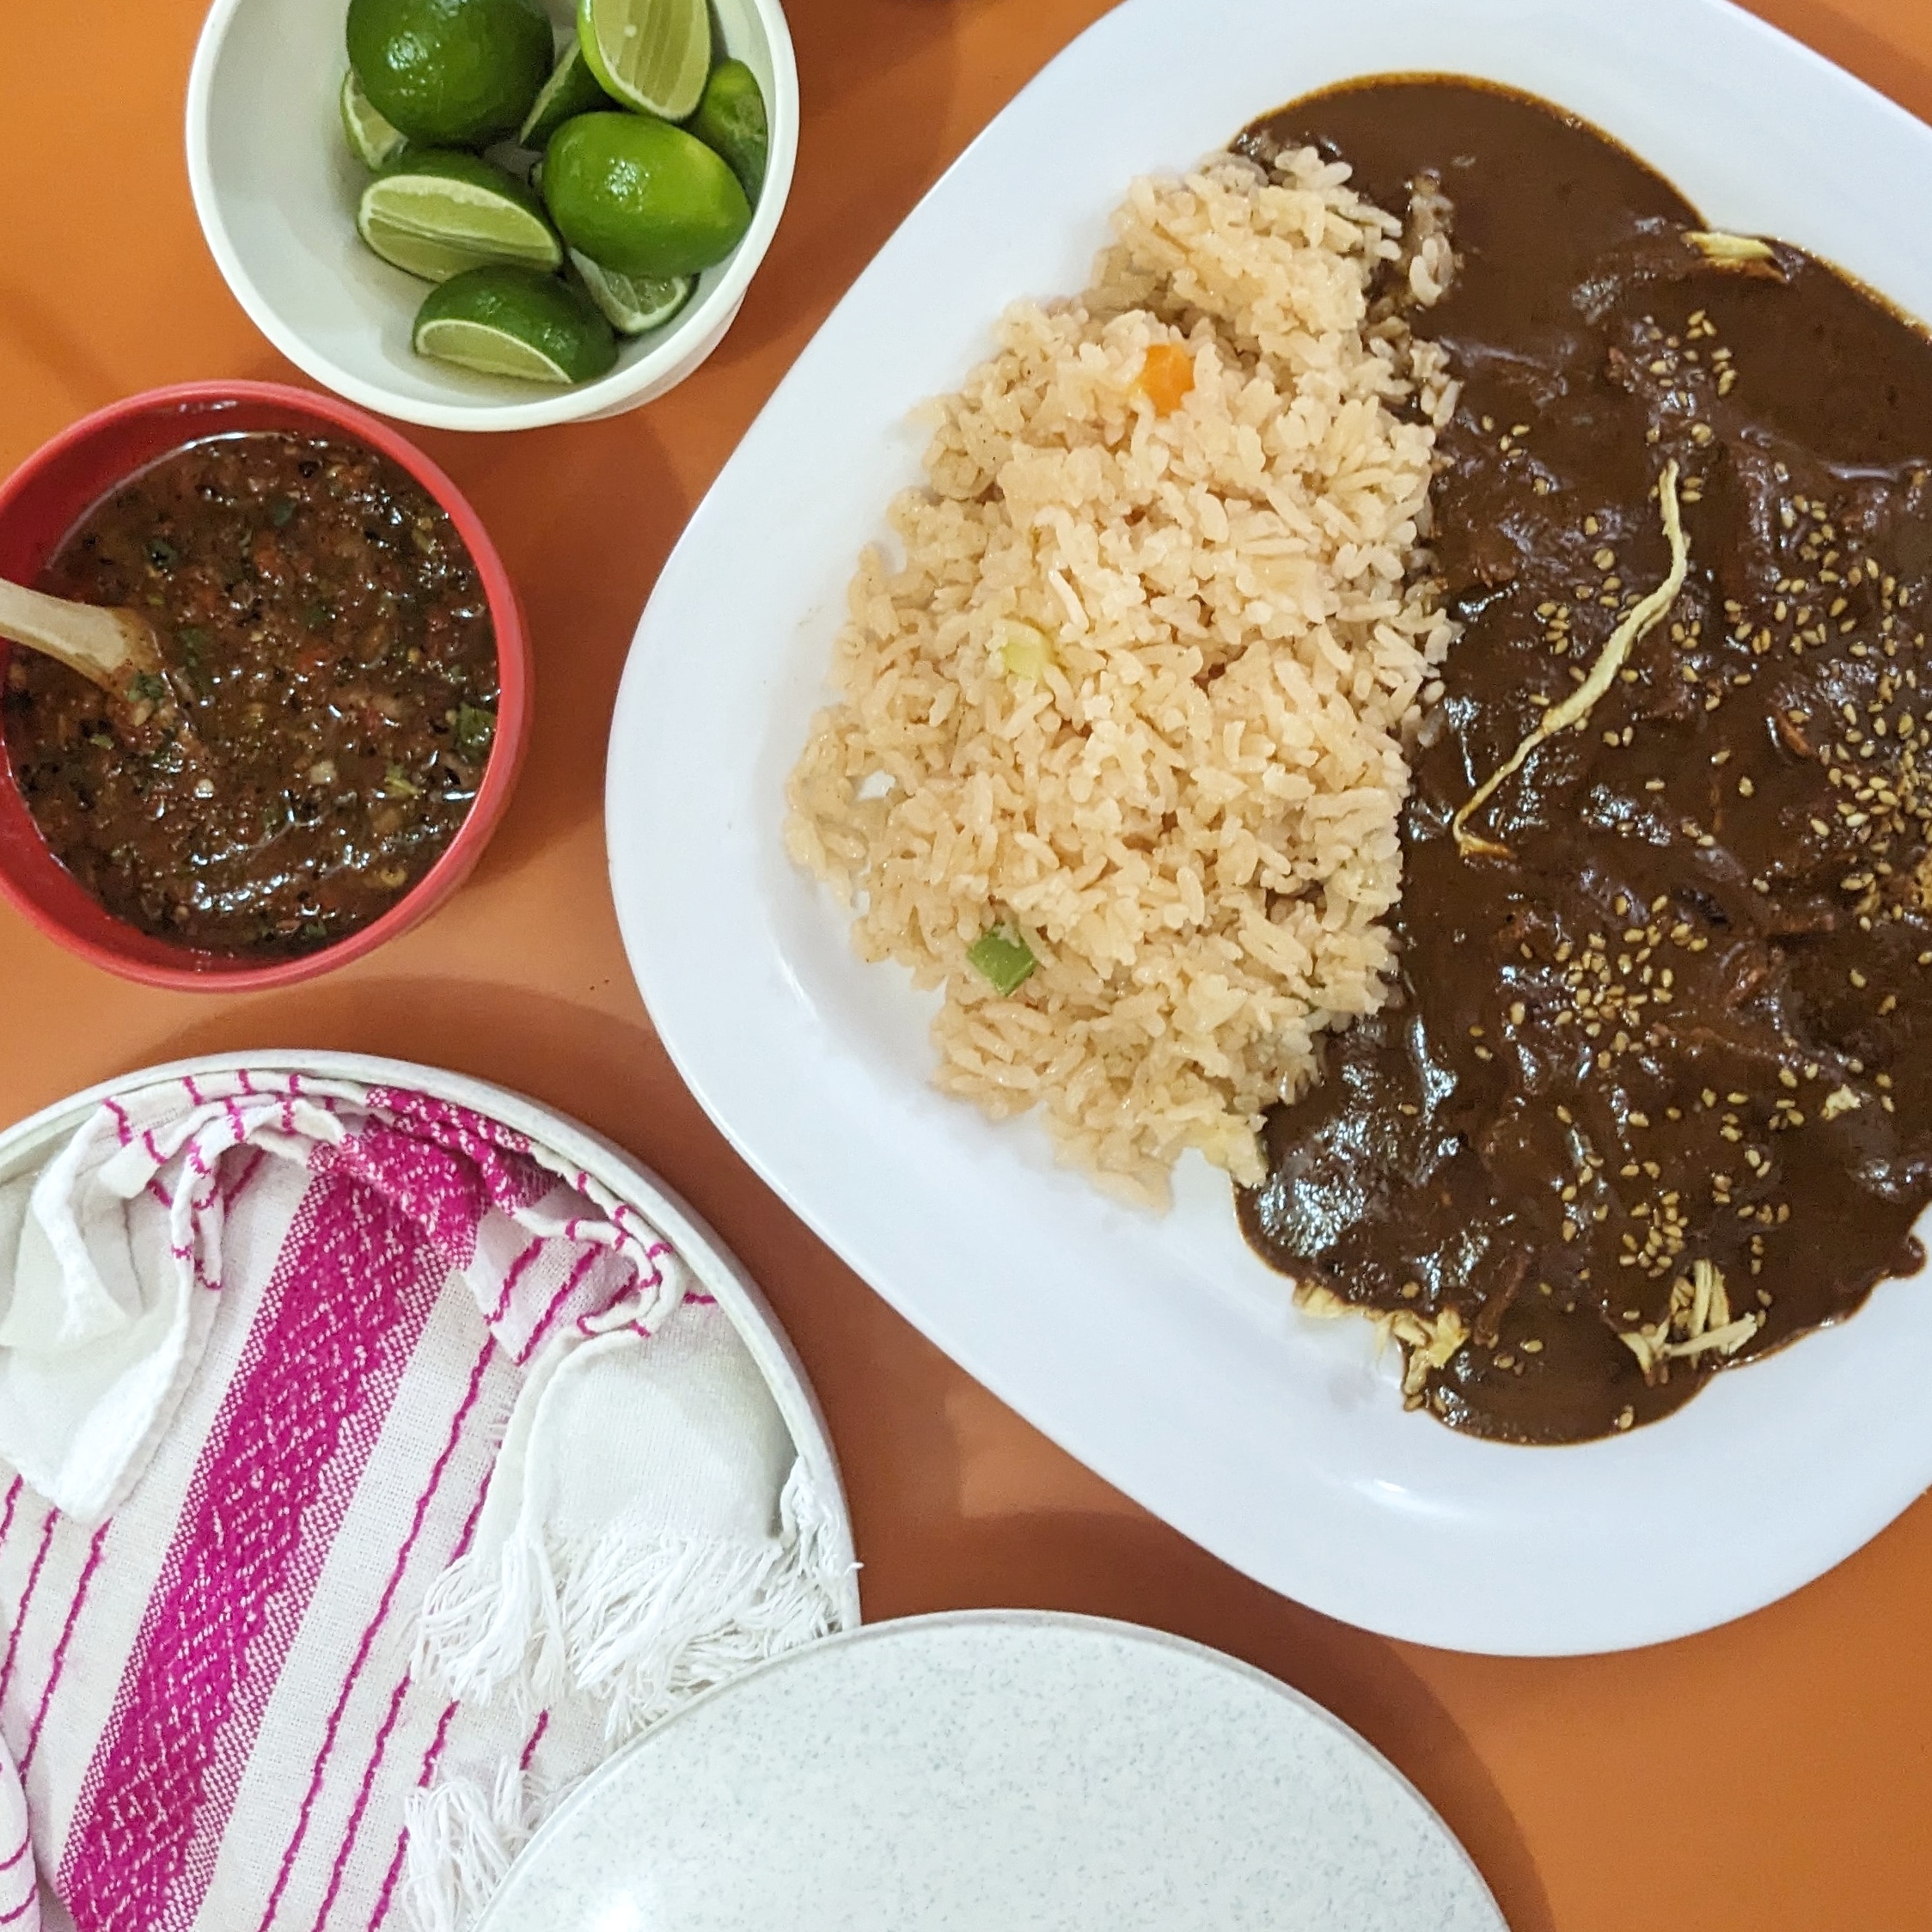 Mole, rice, lime, salsa and tortillas at Fonda Chimalistac, one of the best places to eat at in mexico city